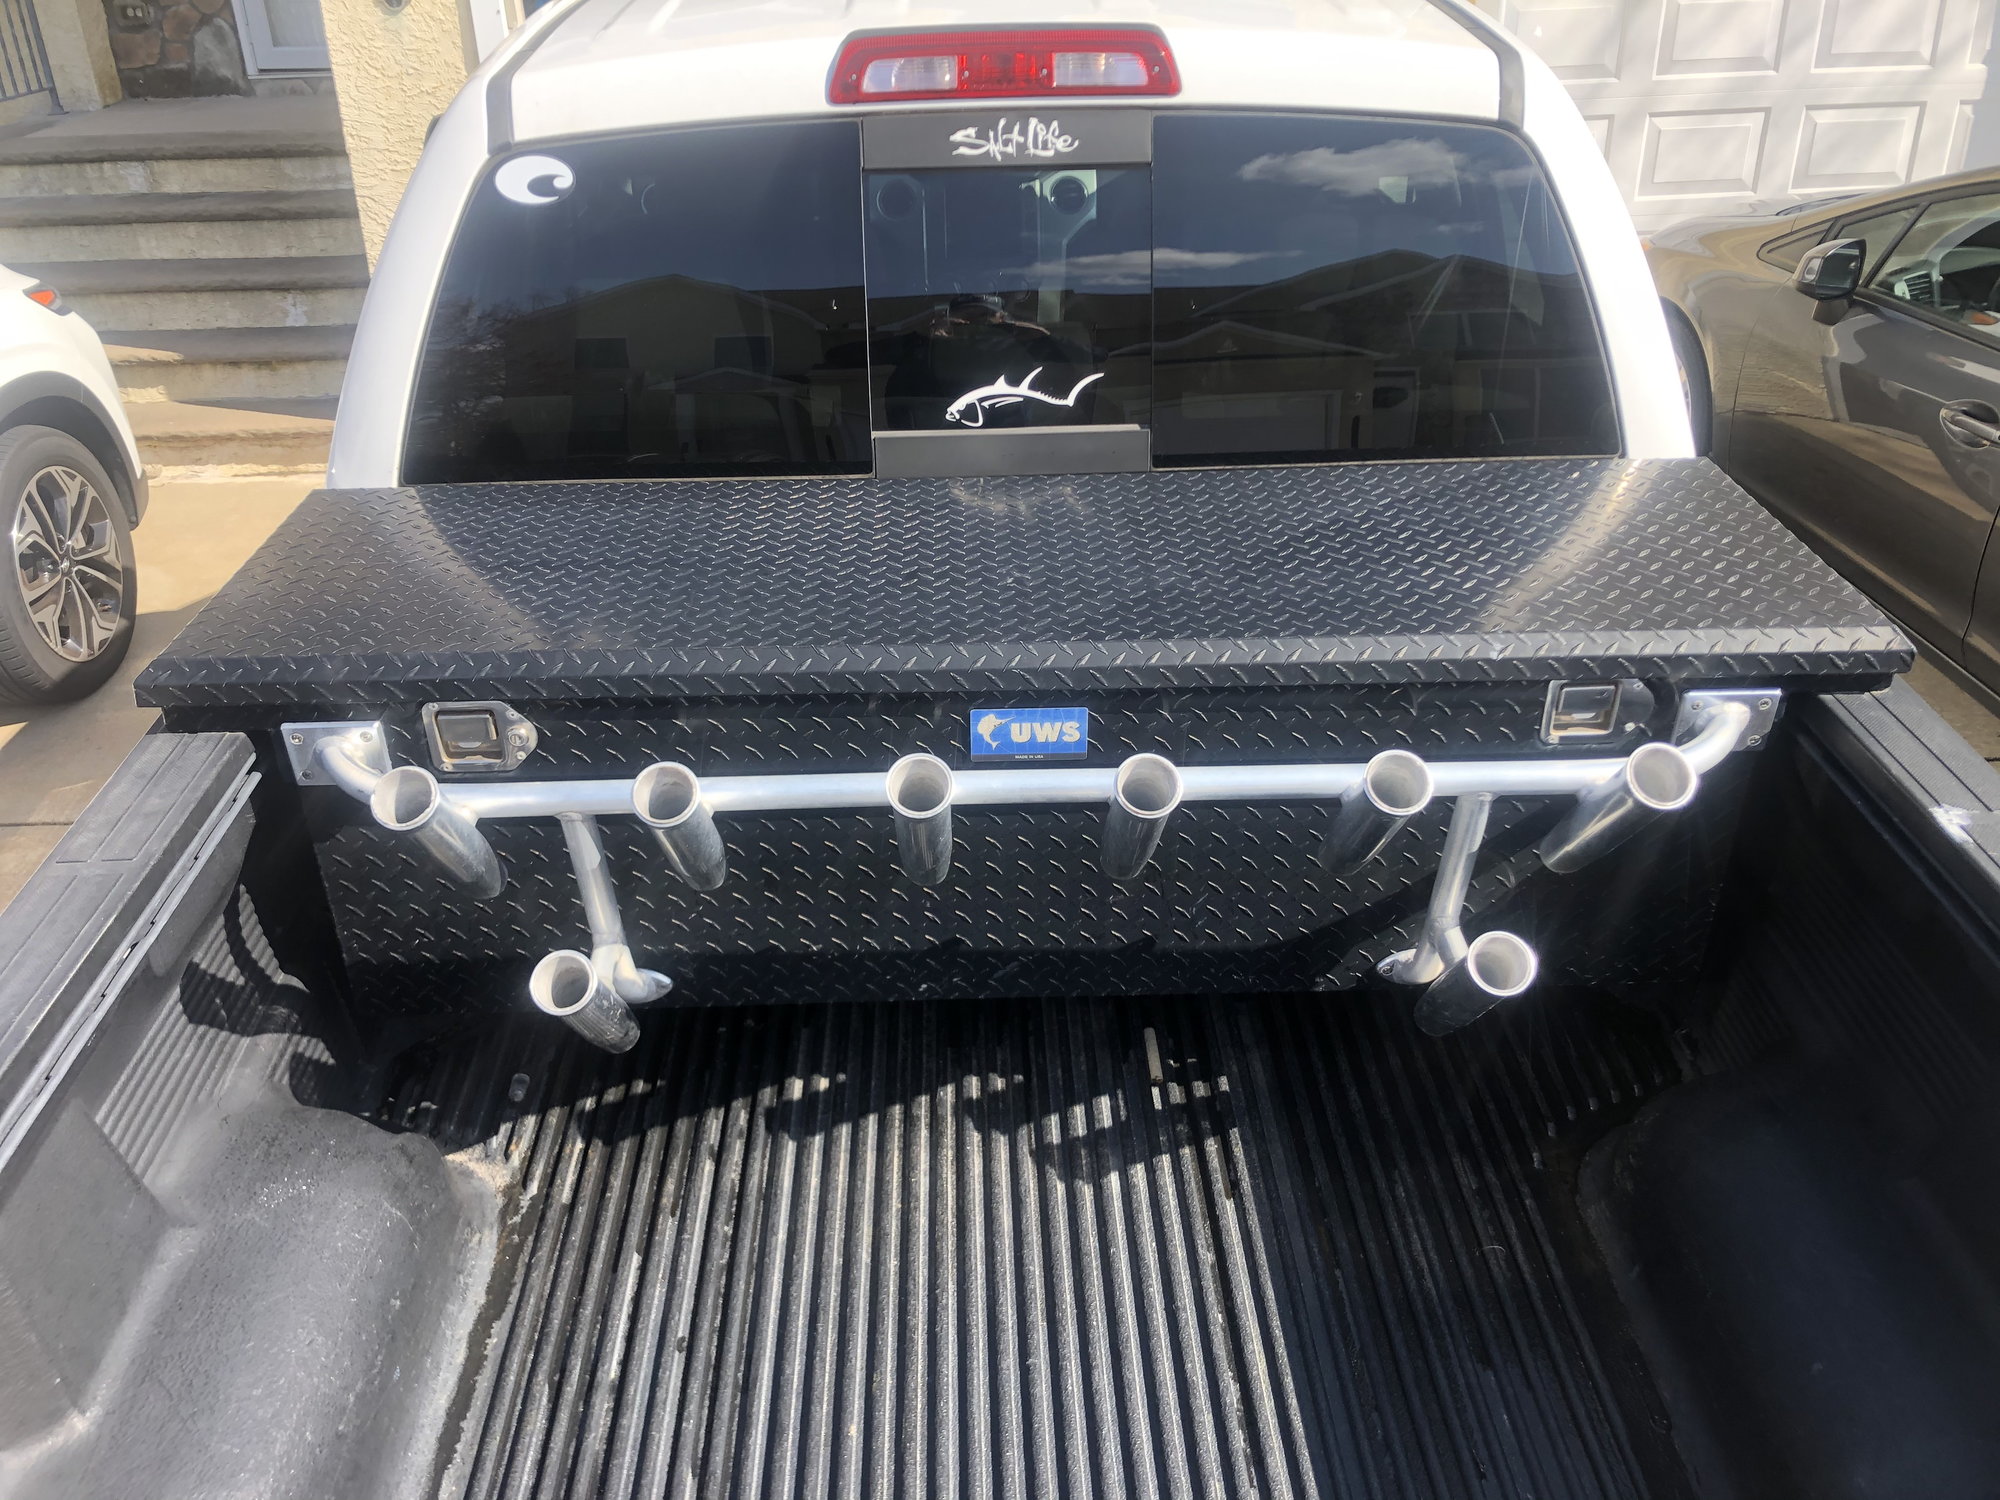 fishing rod holder on front bumper.? - The Hull Truth - Boating